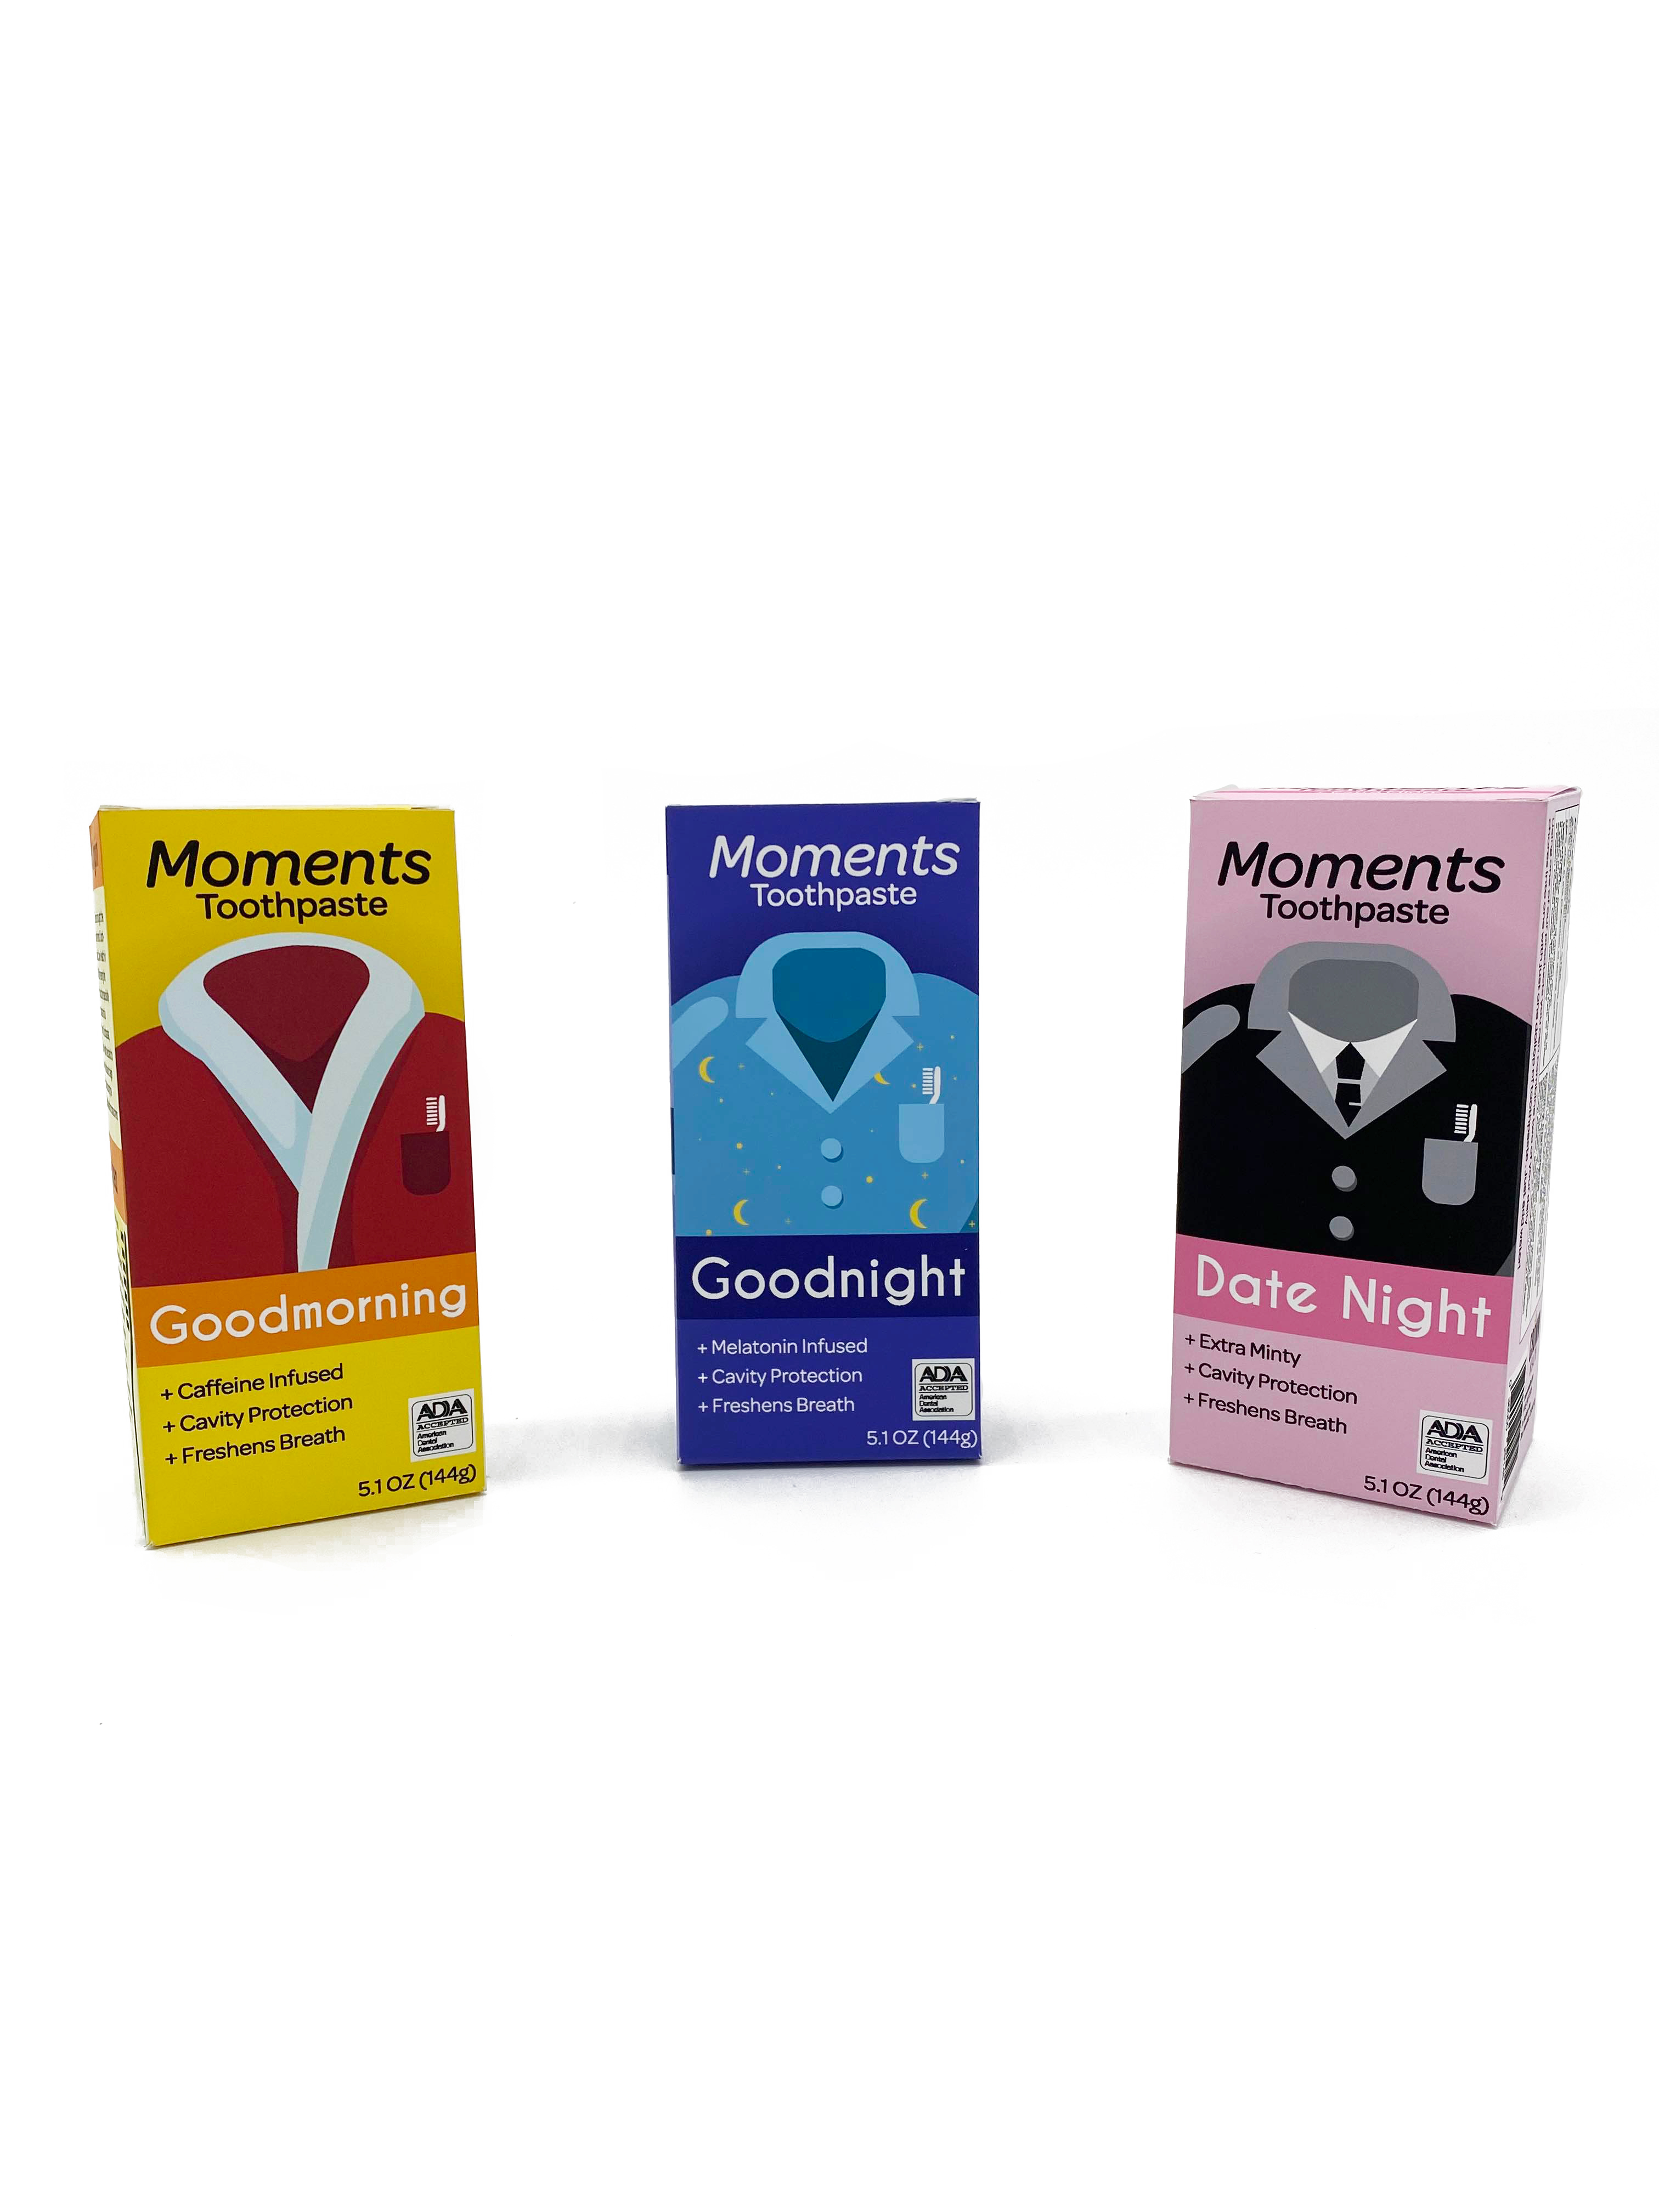 Moments Toothpaste Front<br>2022<br>EPSON Inkjet Print<br>5.75 x 11 x 2.5